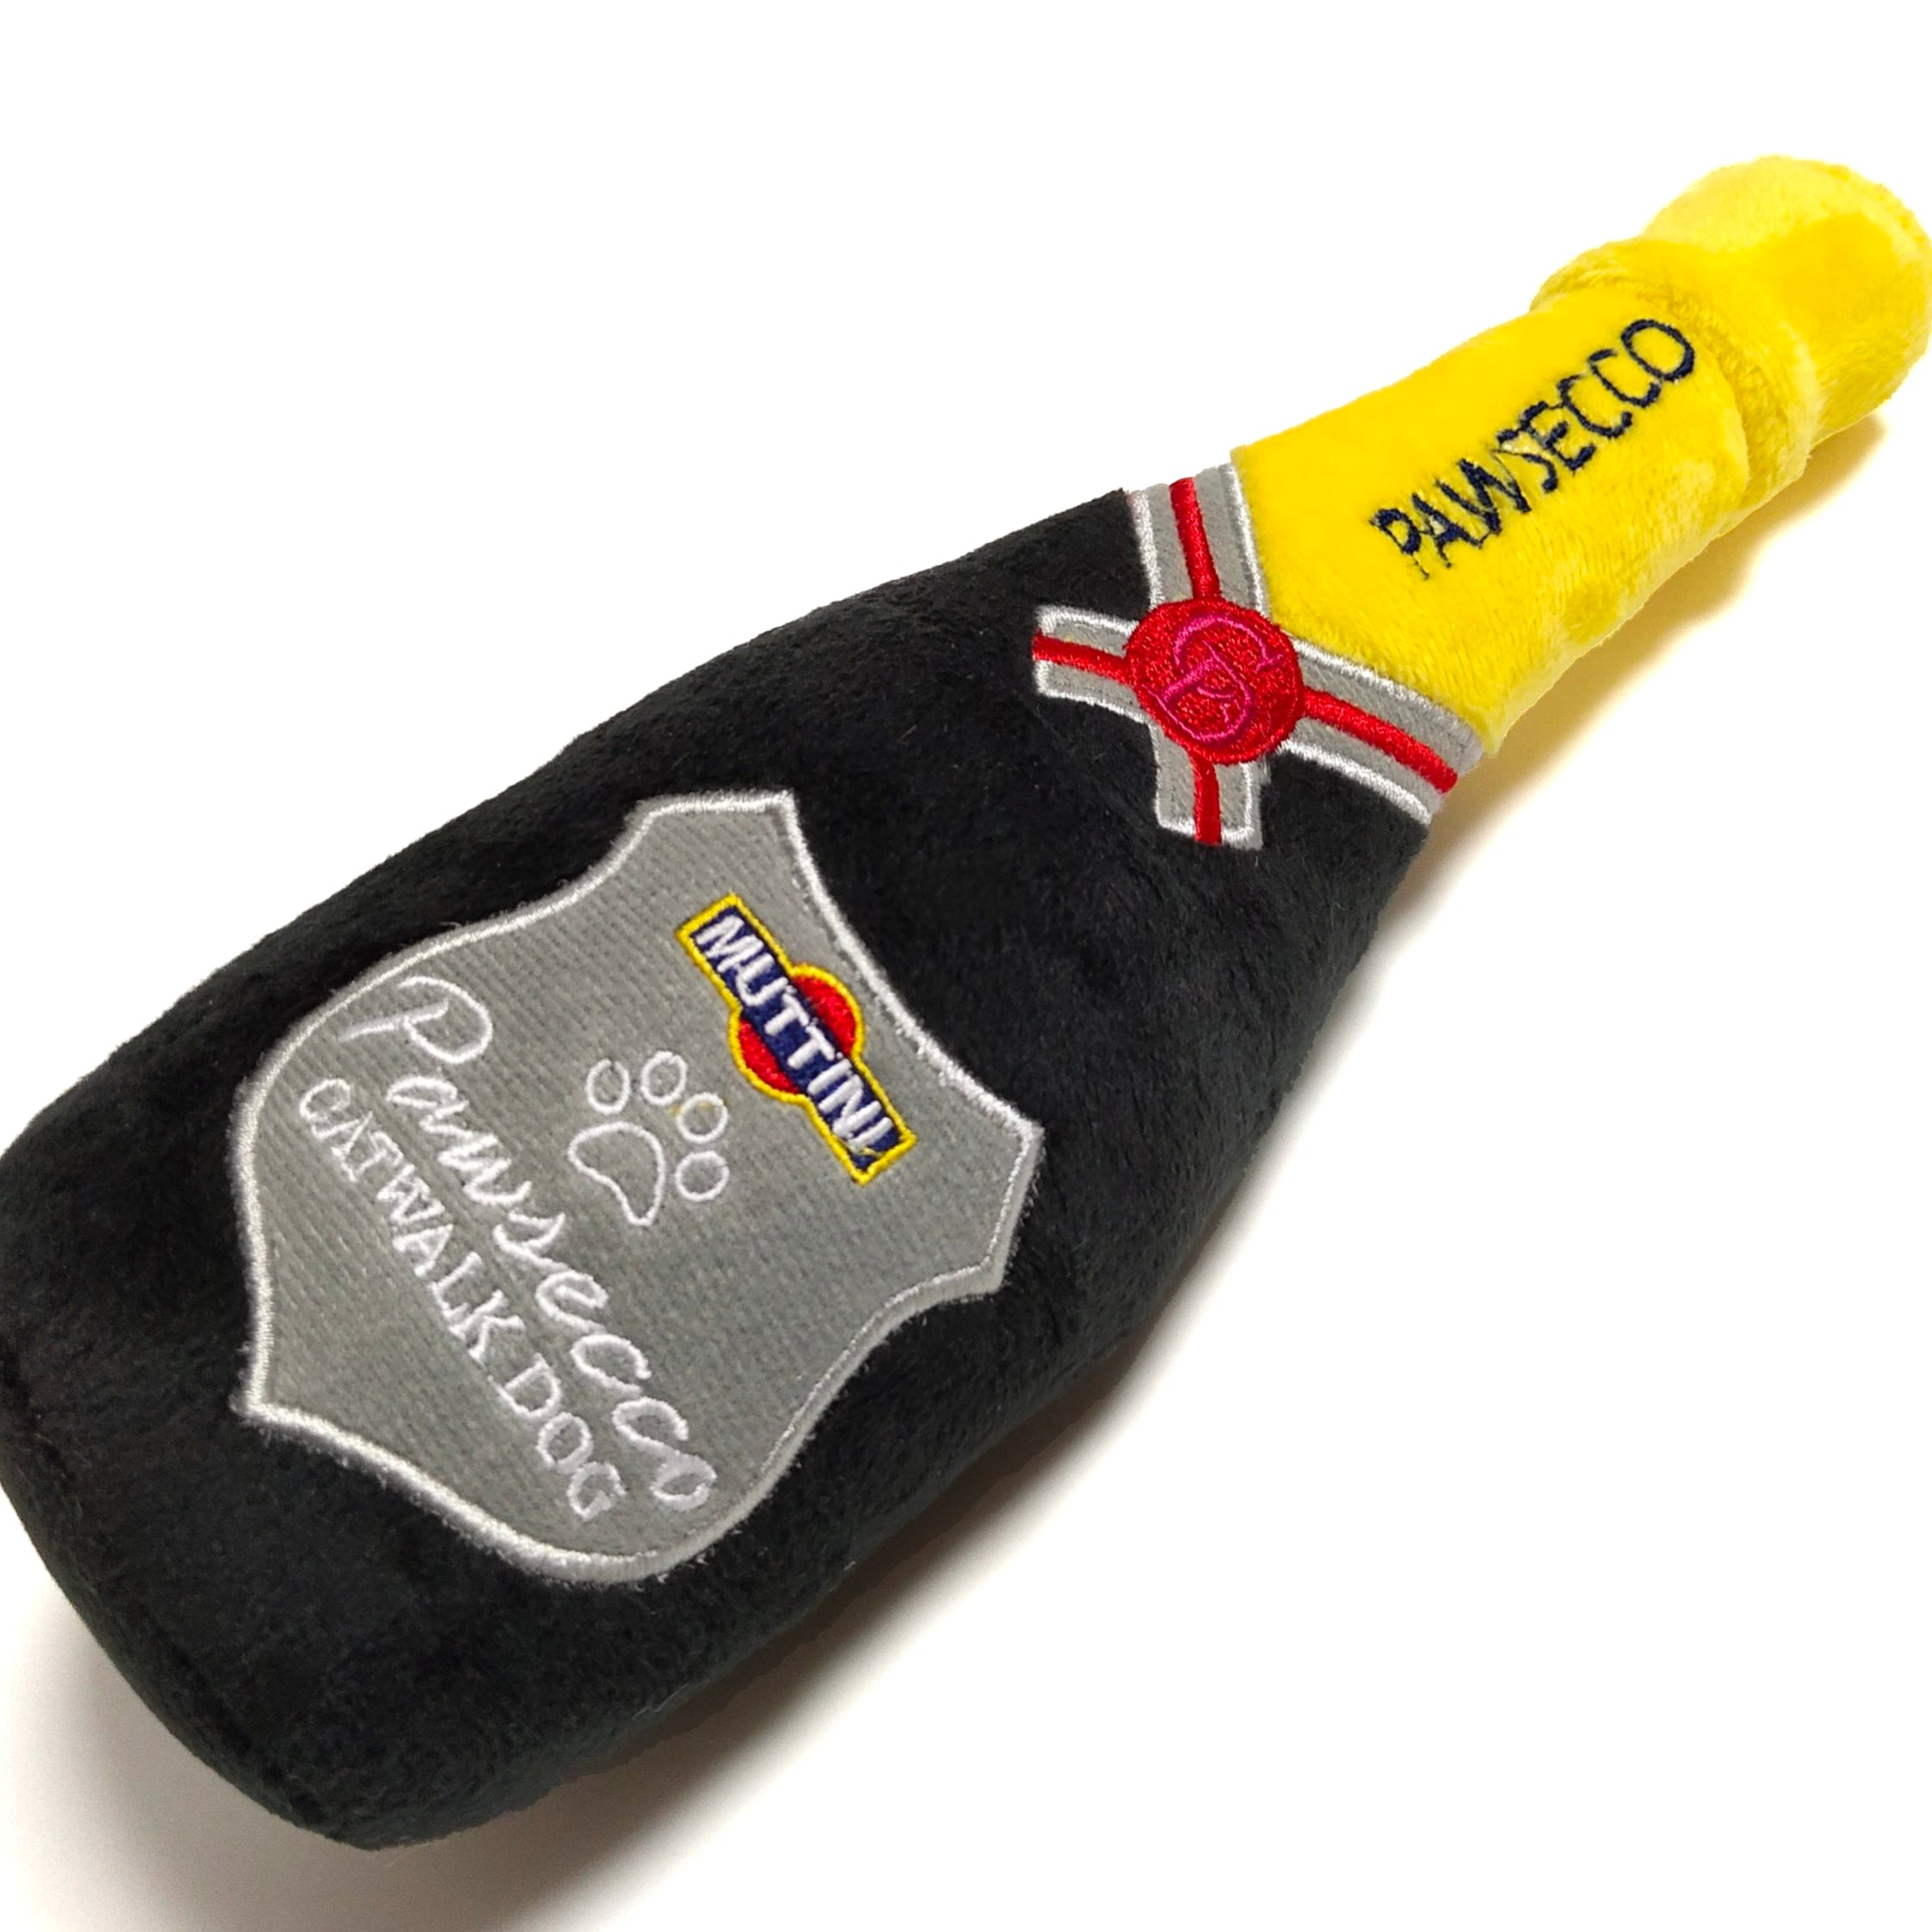 Funny Prosecco Bottle Dog Toy